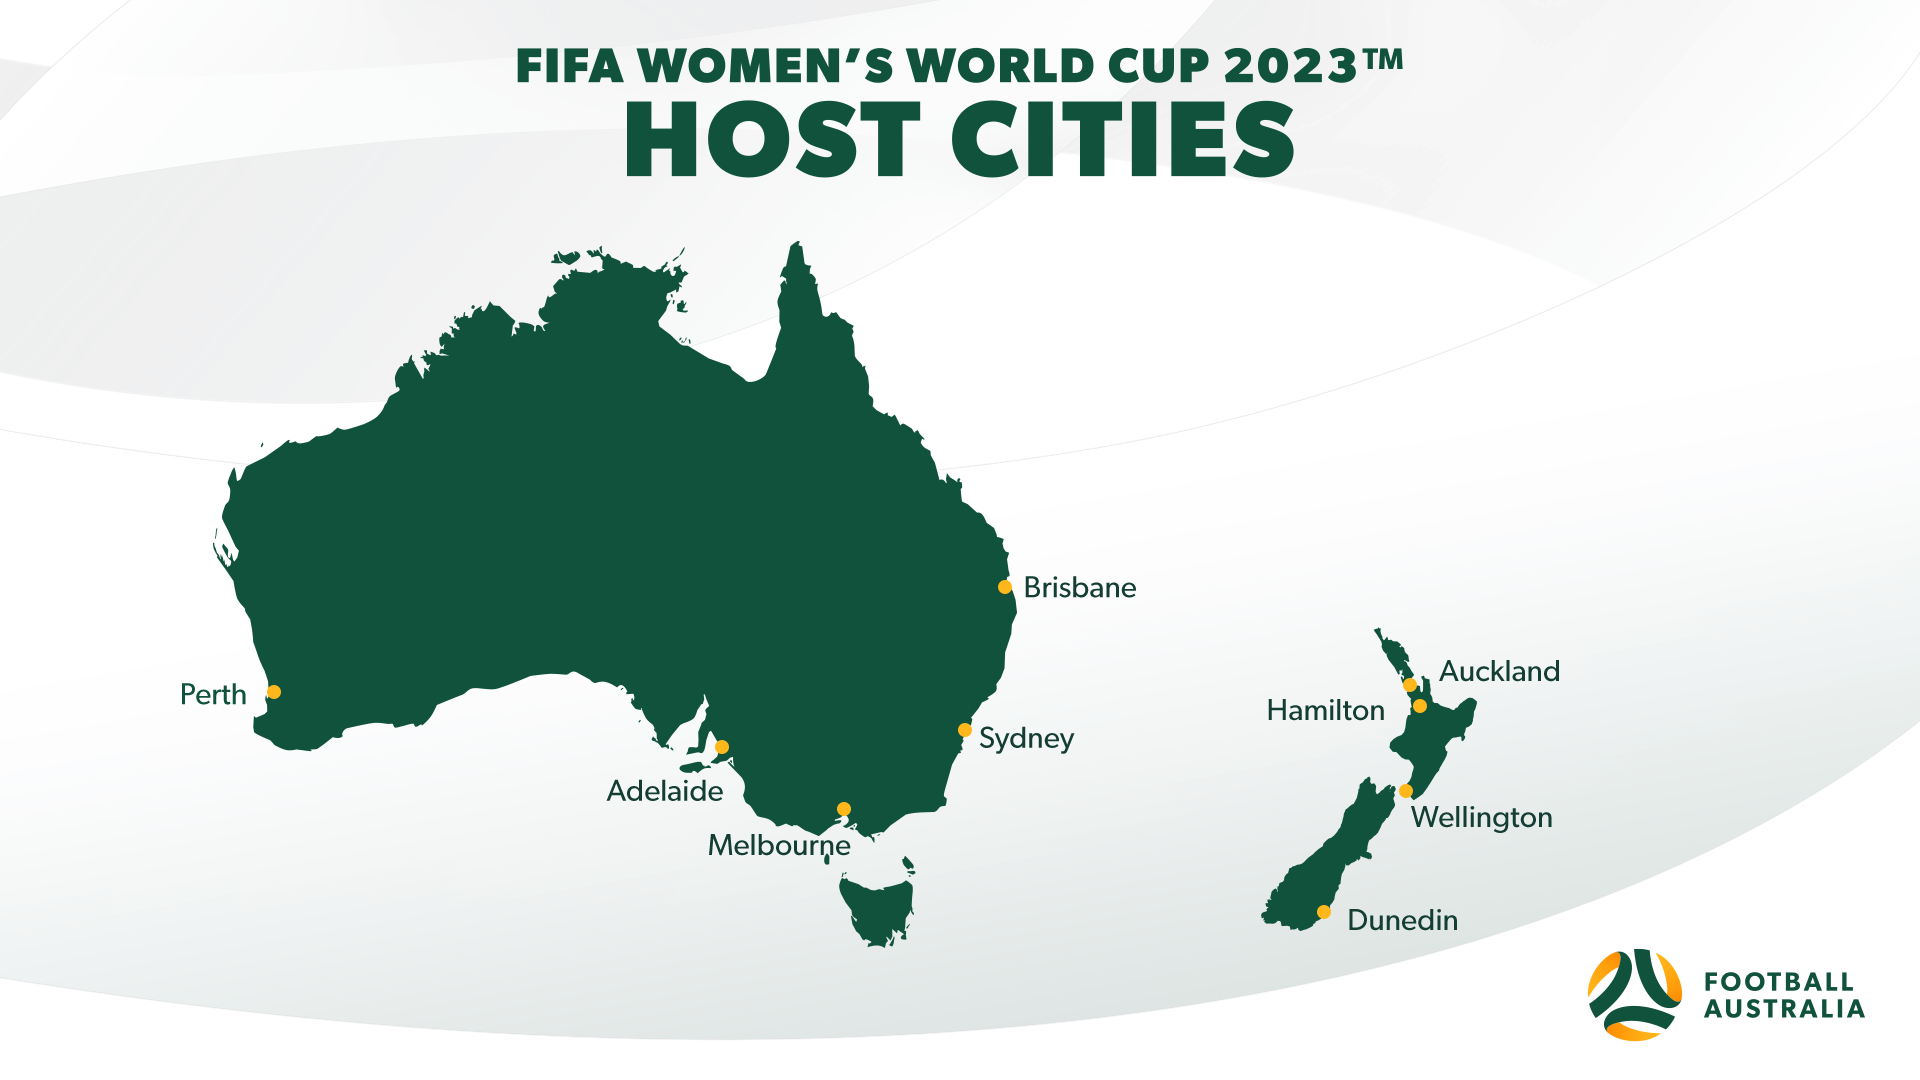 Venues for the 2023 FIFA Women's World Cup ™ in Australia and New Zealand